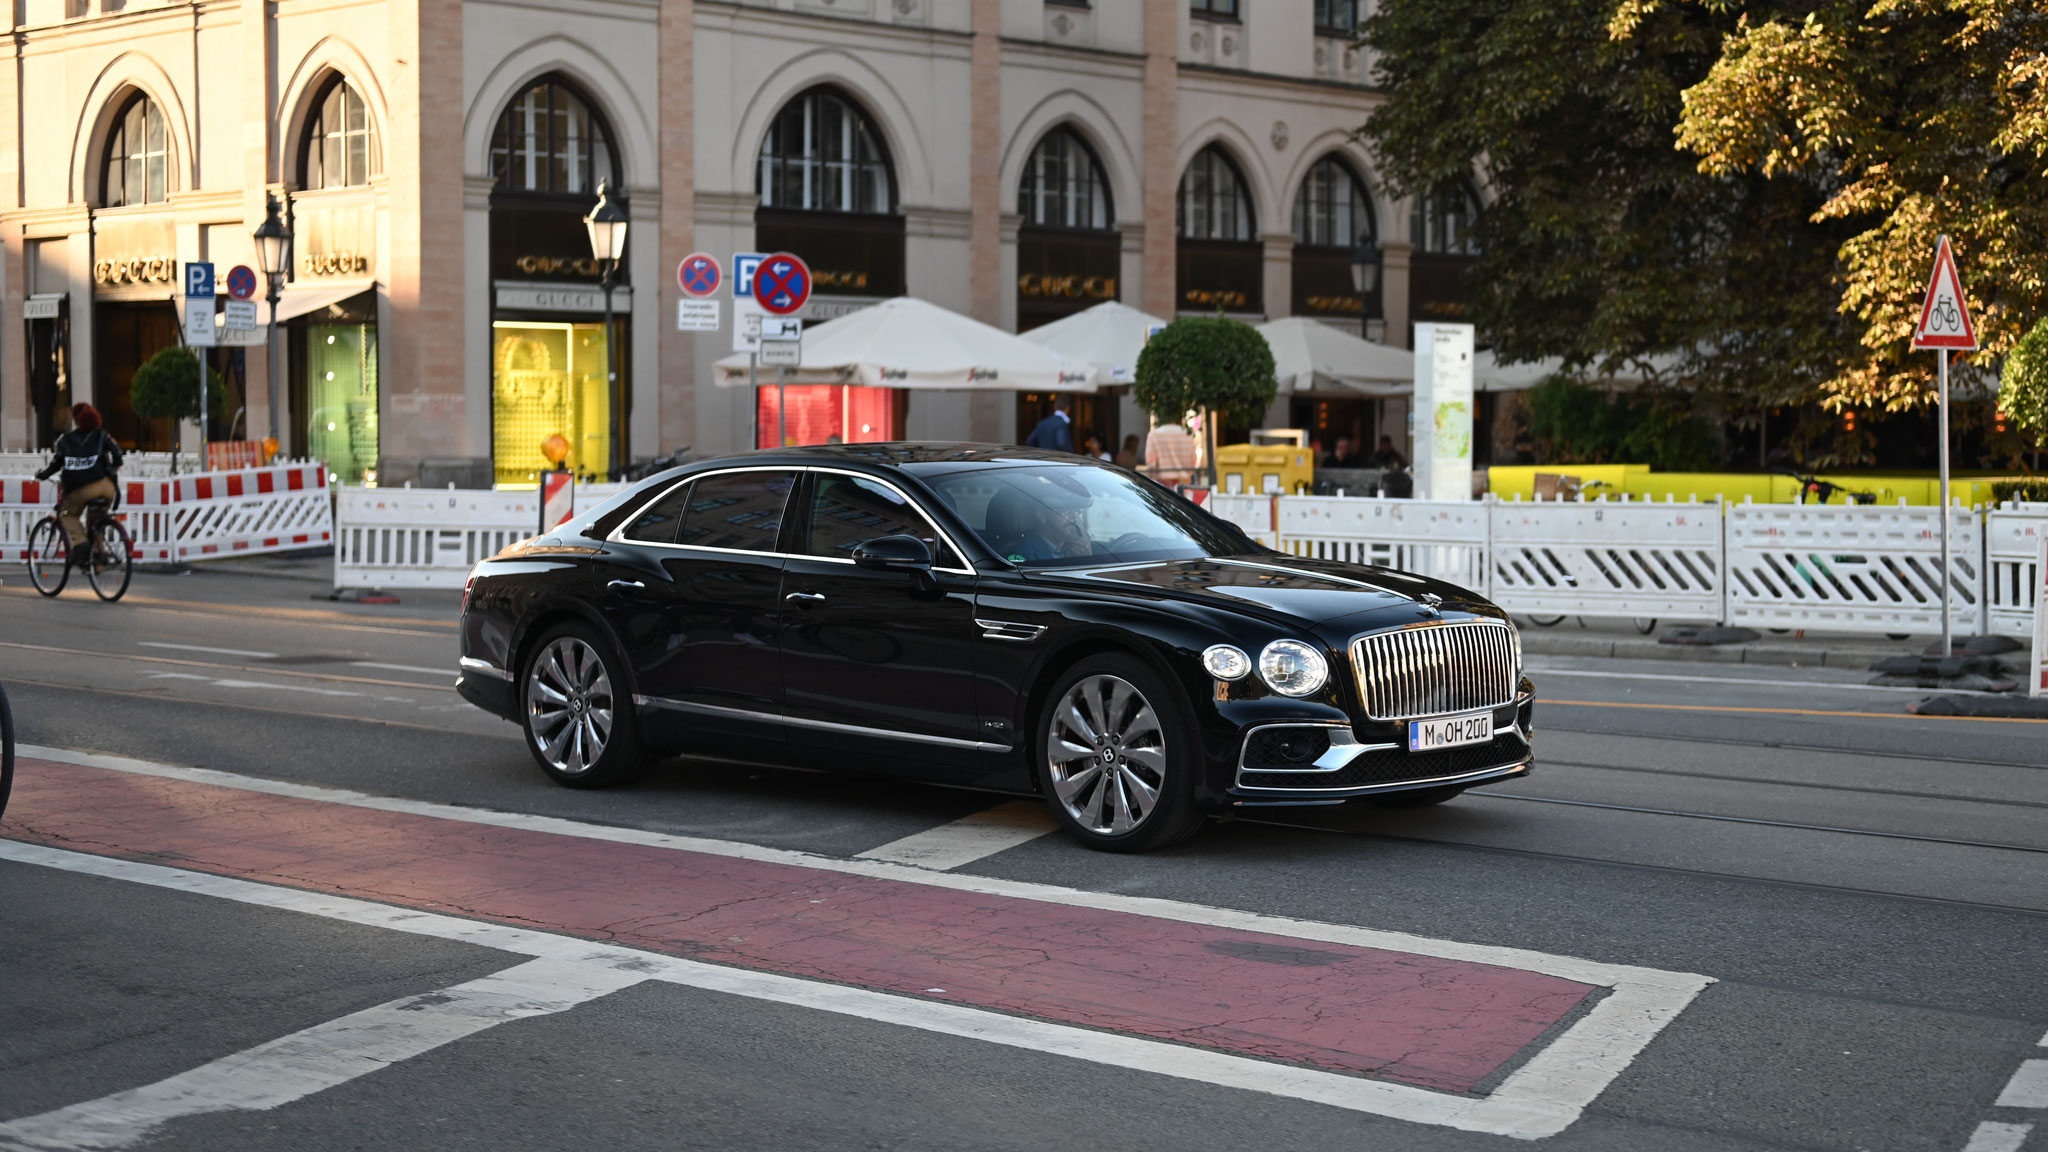 Bentley Flying Spur - M-OH200